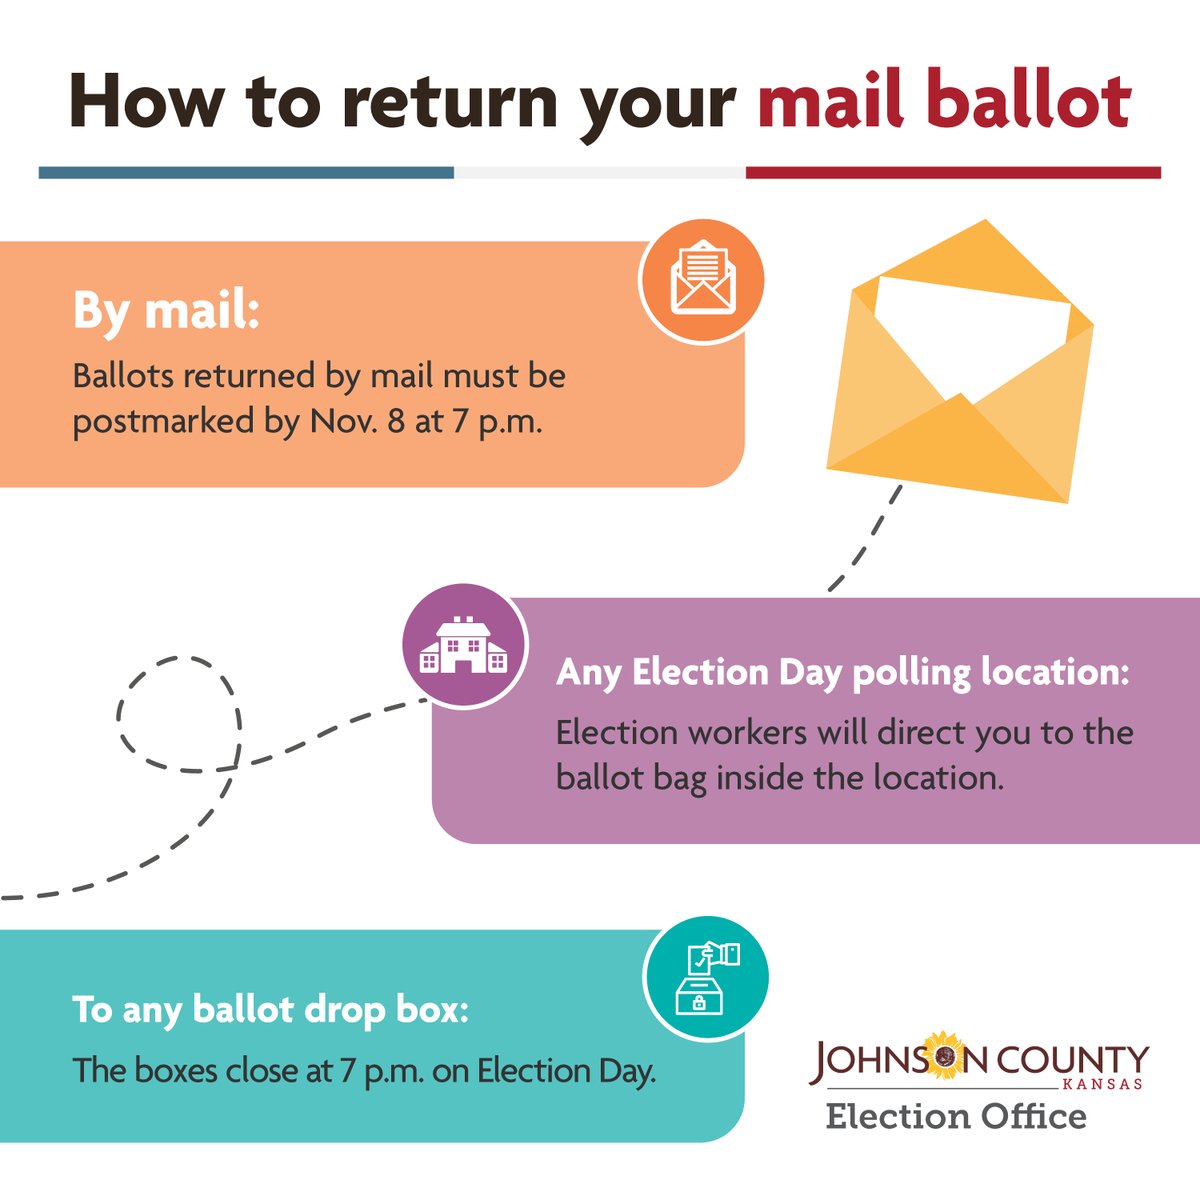 Mail ballots ✉️ can be dropped at any polling location or drop box. Visit jocoelection.org/voting-electio… to find a drop box location.